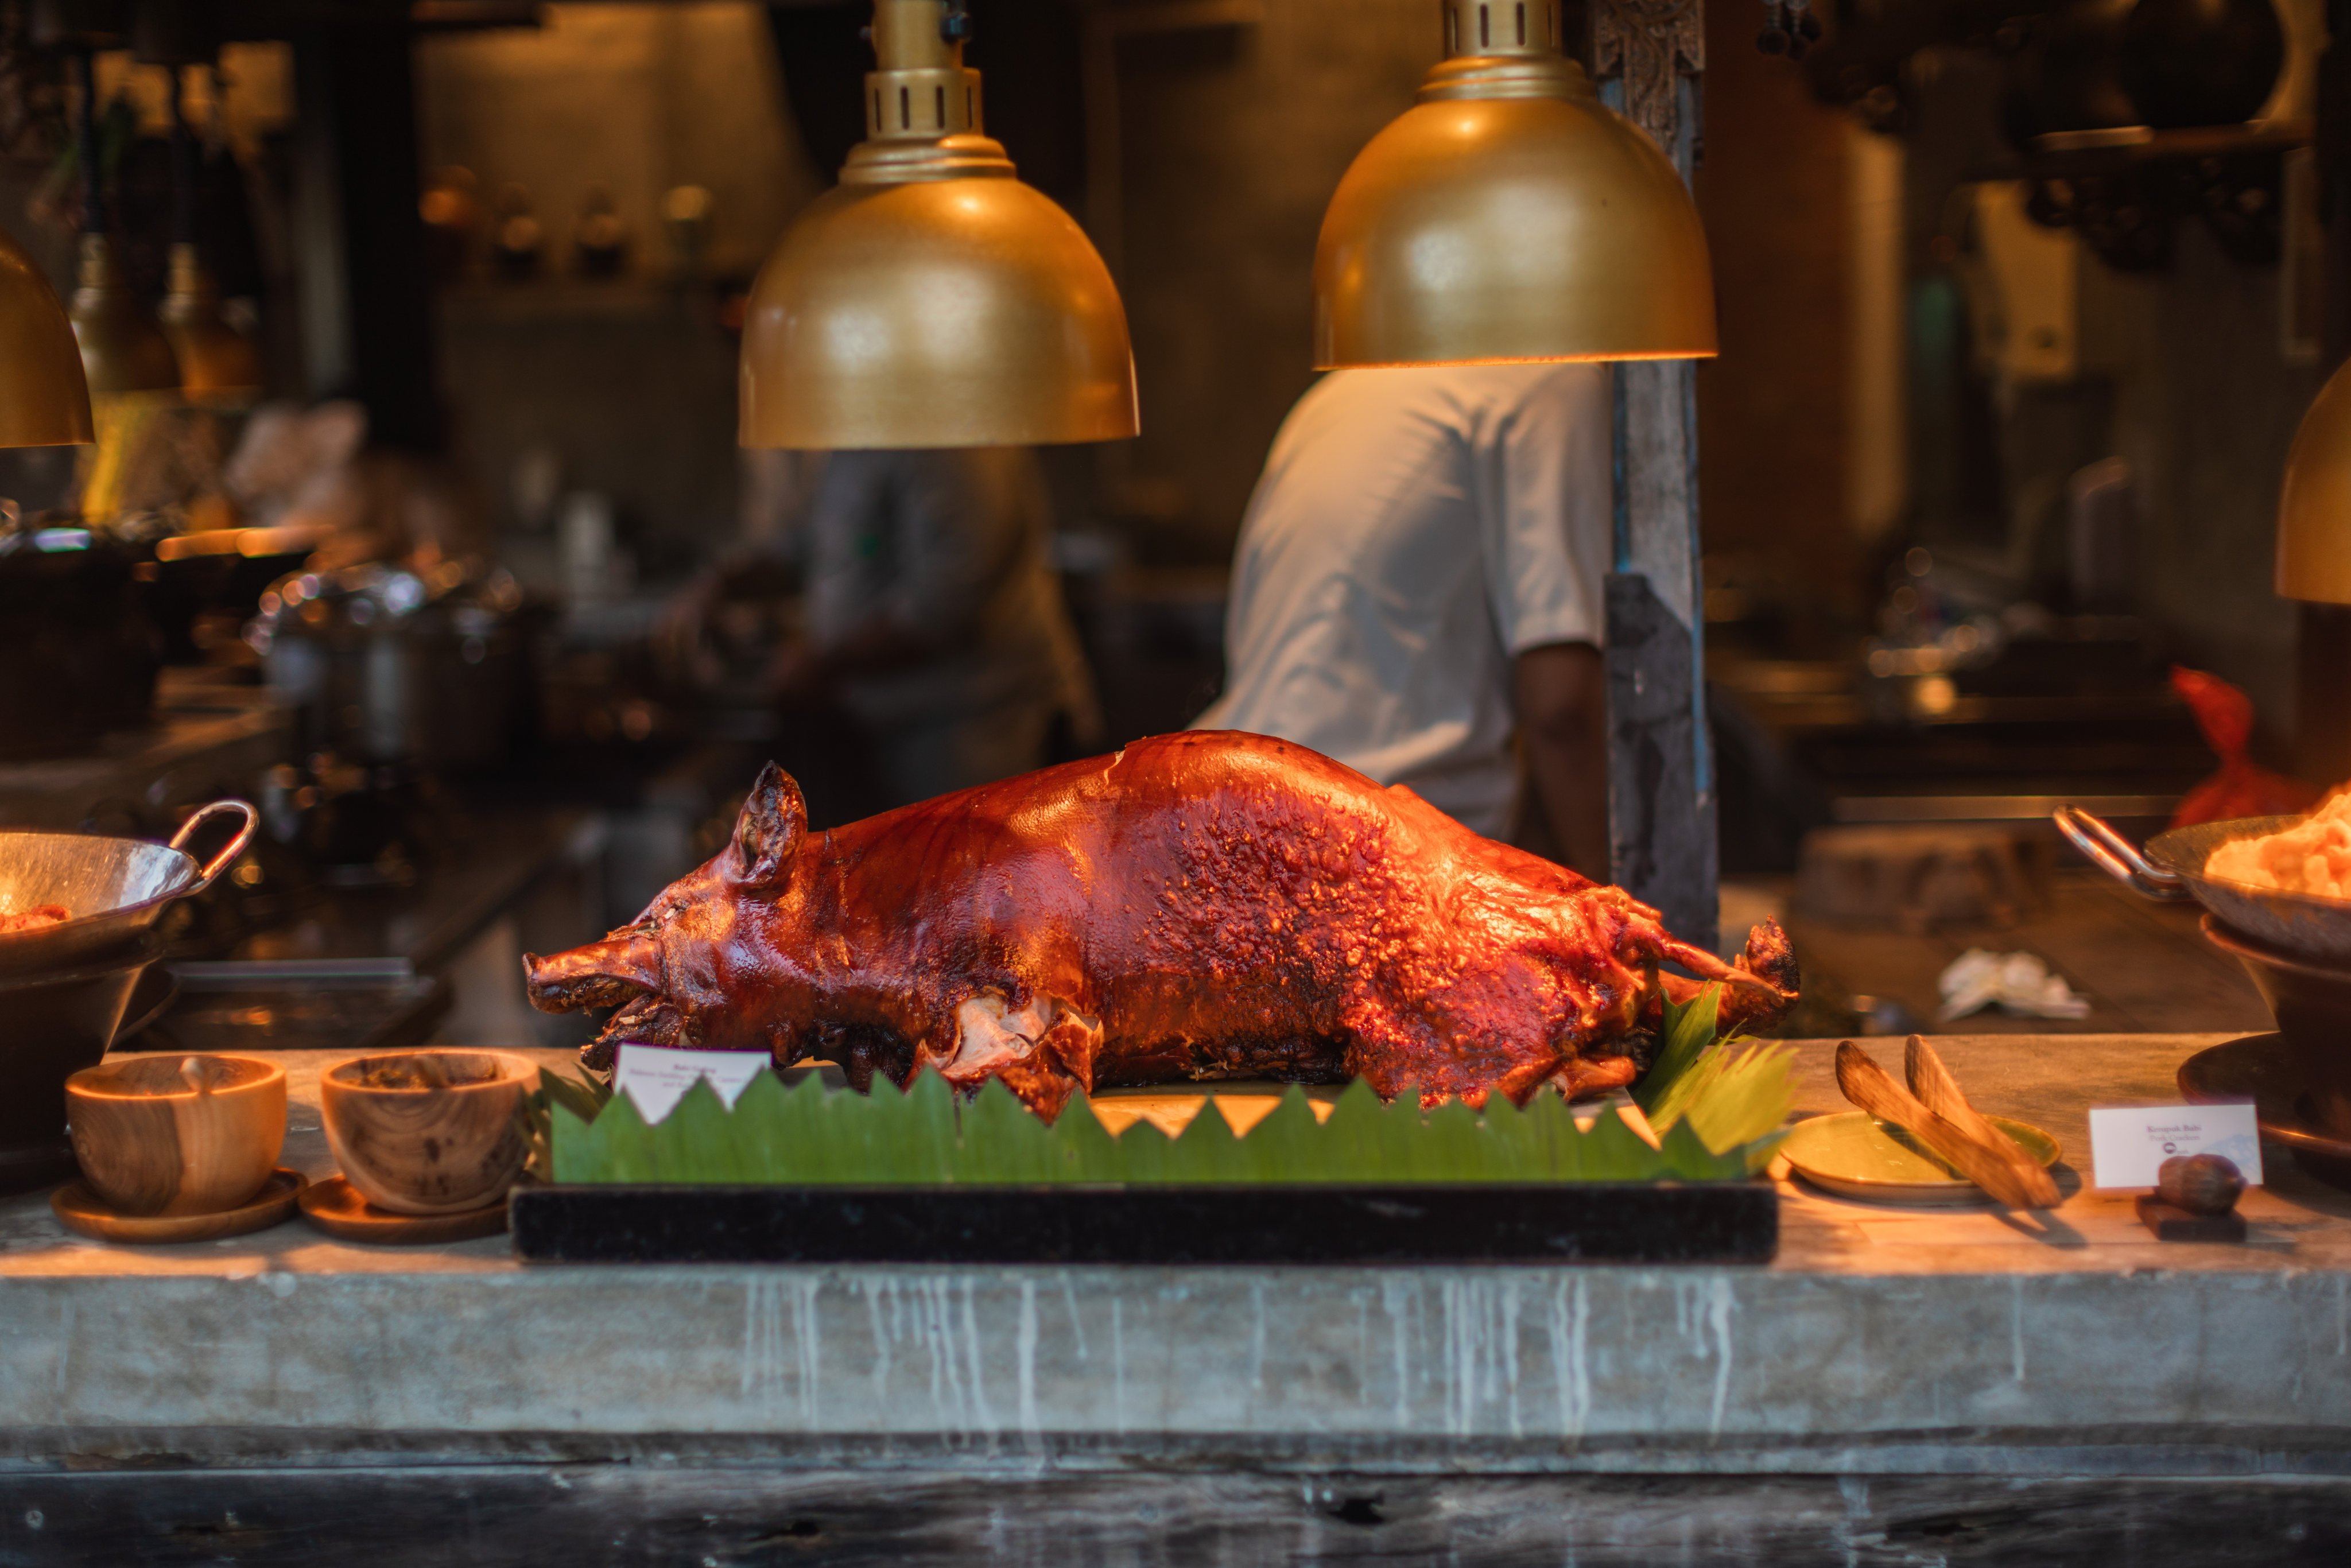 Balinese whole roast pig, known as babi guling, a favourite of late celebrity chef Antony Bourdain, was once served only at religious celebrations and weddings, but is now sold in restaurants across Bali. Photo: Kampoeng Bali